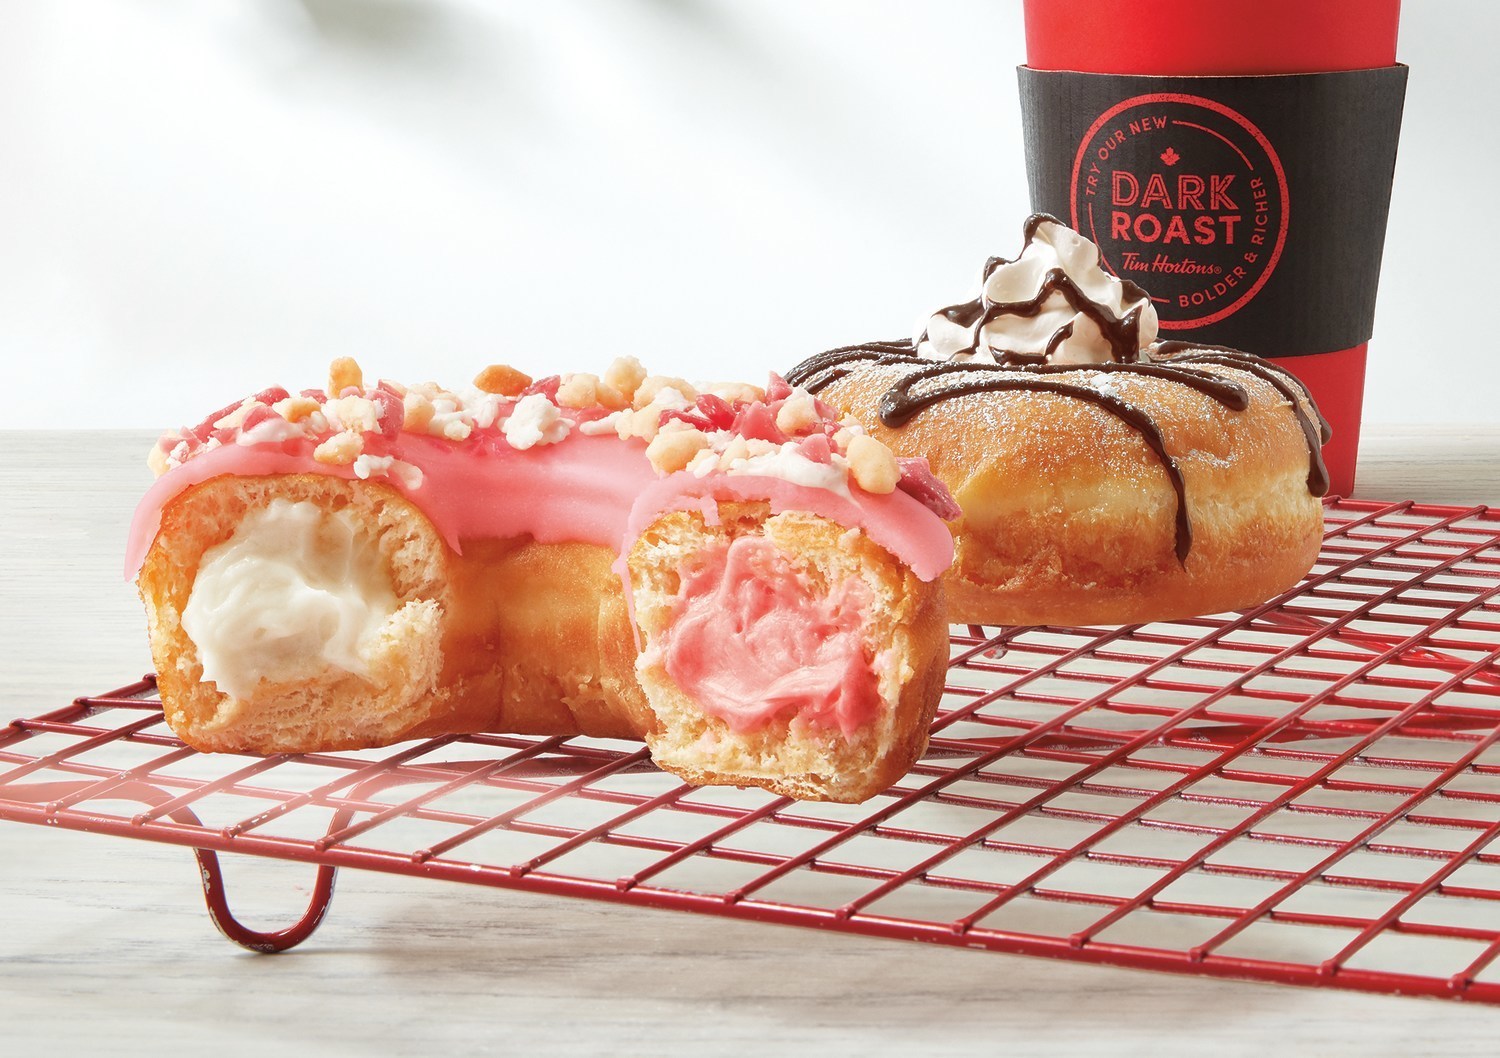 Tim Hortons Filled Ring Dream Donuts Flavours, Calories, Price